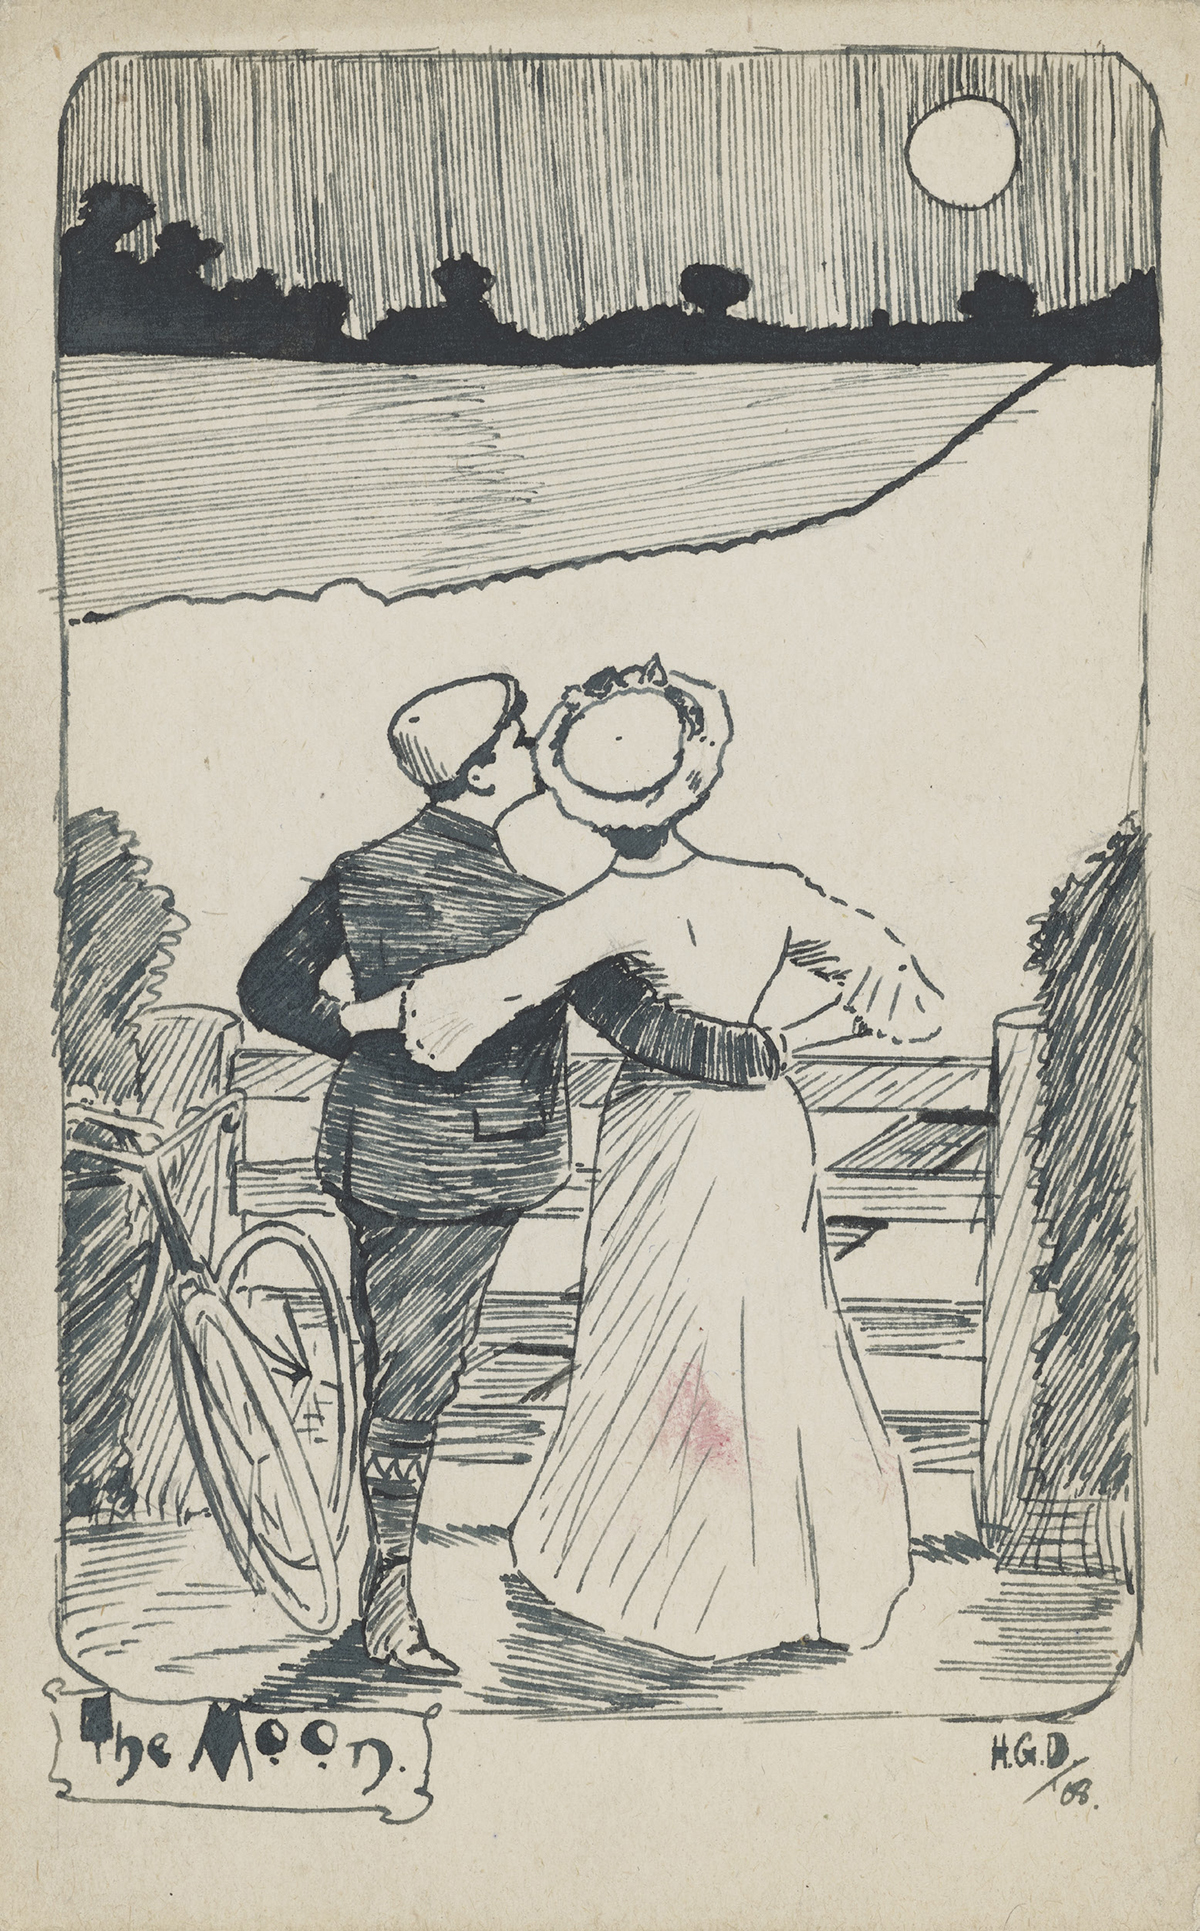 Postcard of a young couple looking up at the moon, 24 Jun 1908, 2014-0038/32